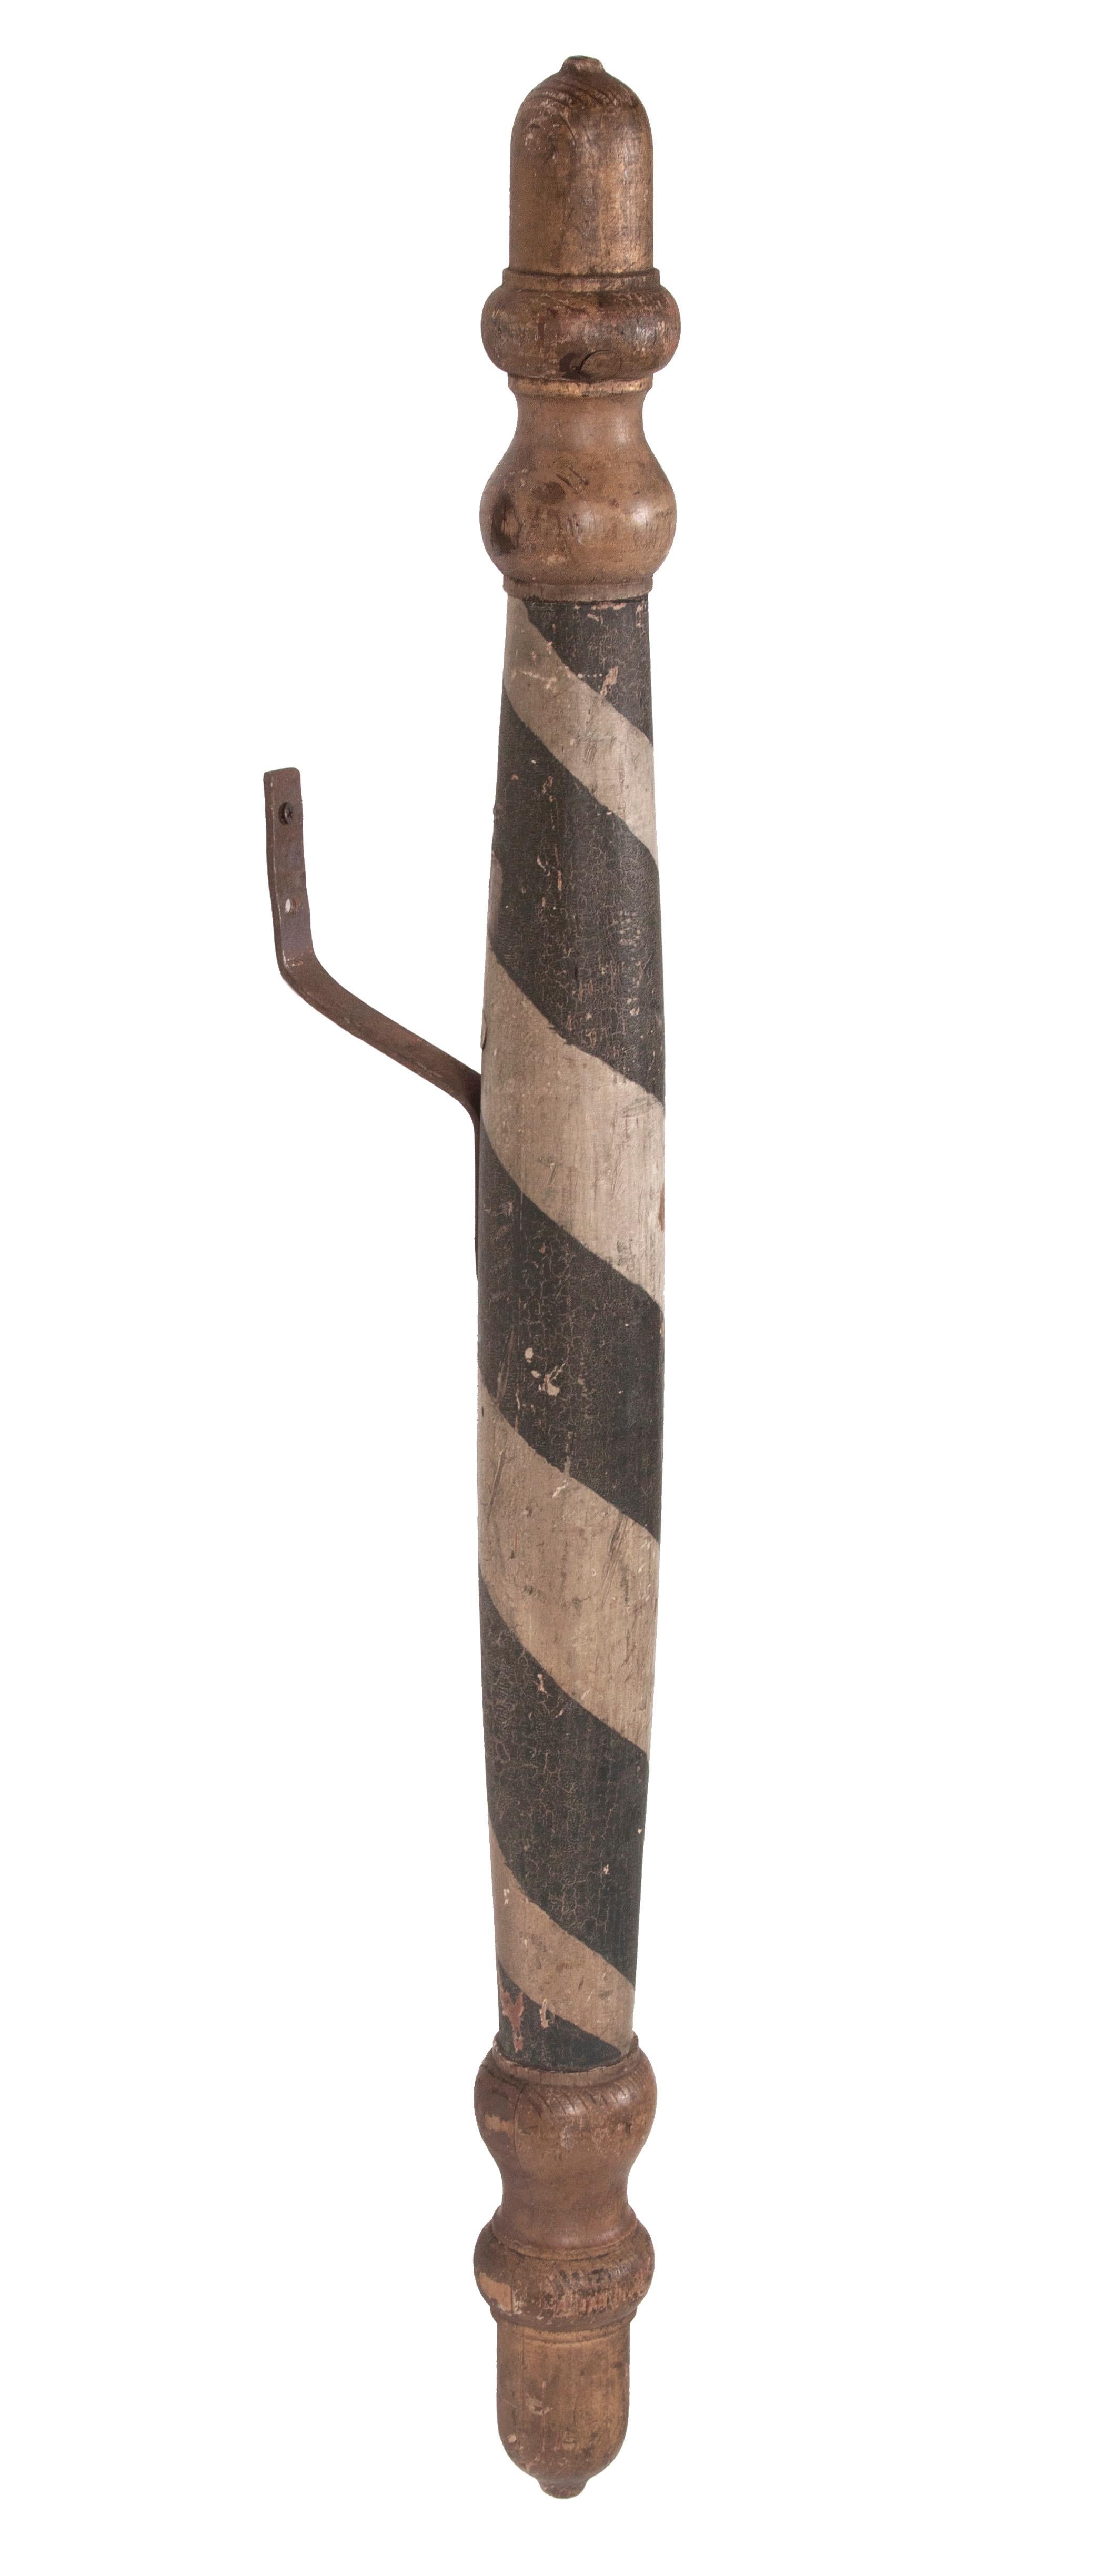 This delicate, New England barber pole has a round, double-tapered shaft with a swelled vase turning above and below, capped at each end with a elongated acorn finial. The center of the pole is painted black and white in the typical, swirling helix,